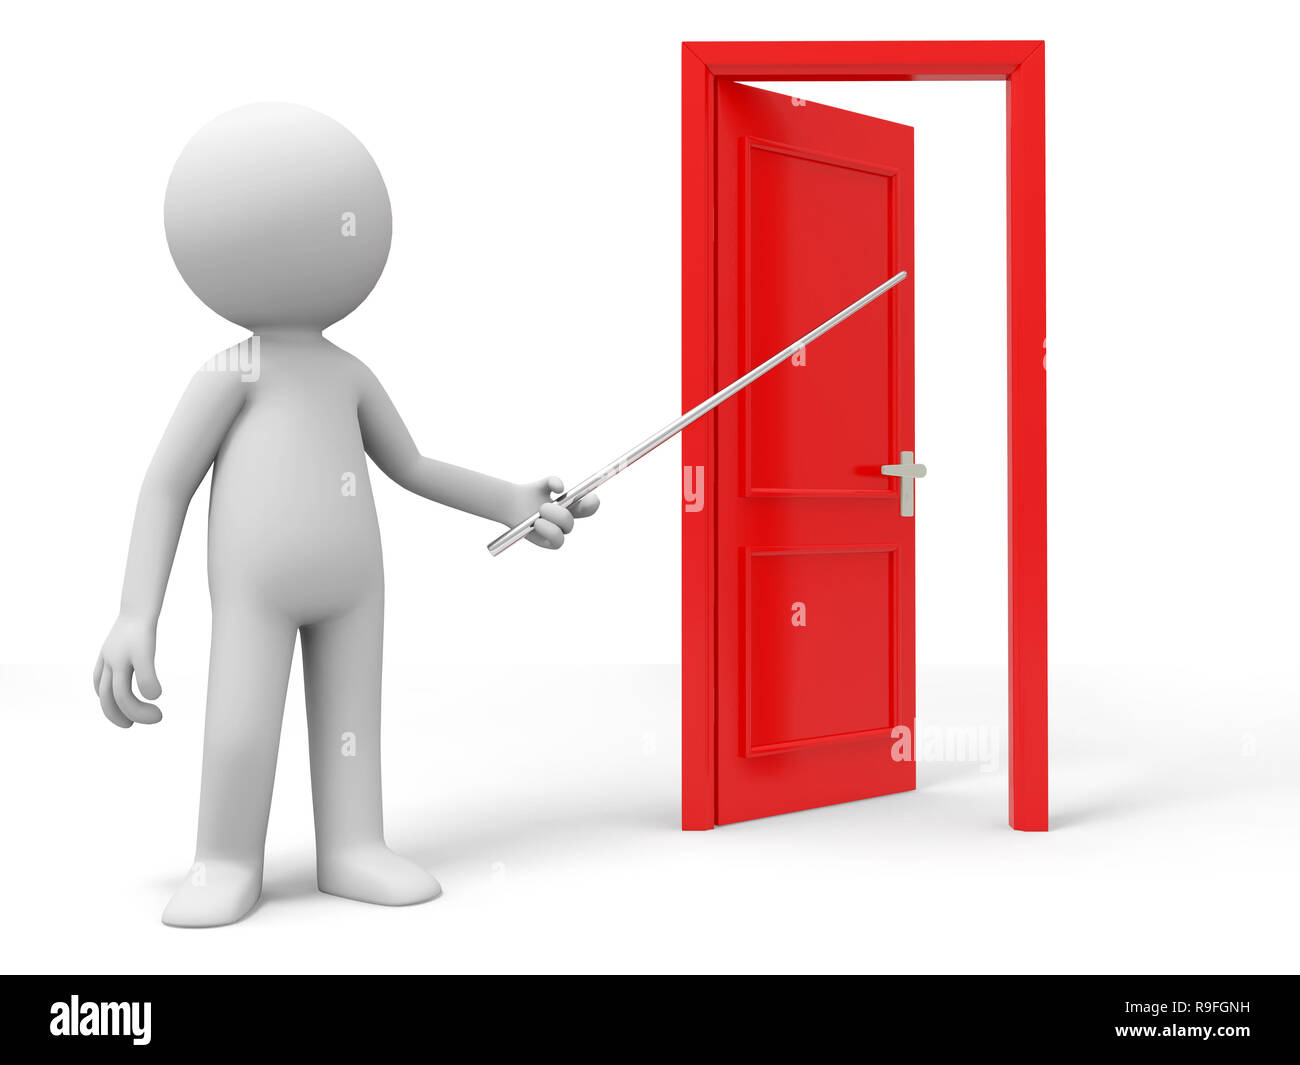 Open,Point,Introduce,A person points a opened door Stock Photo